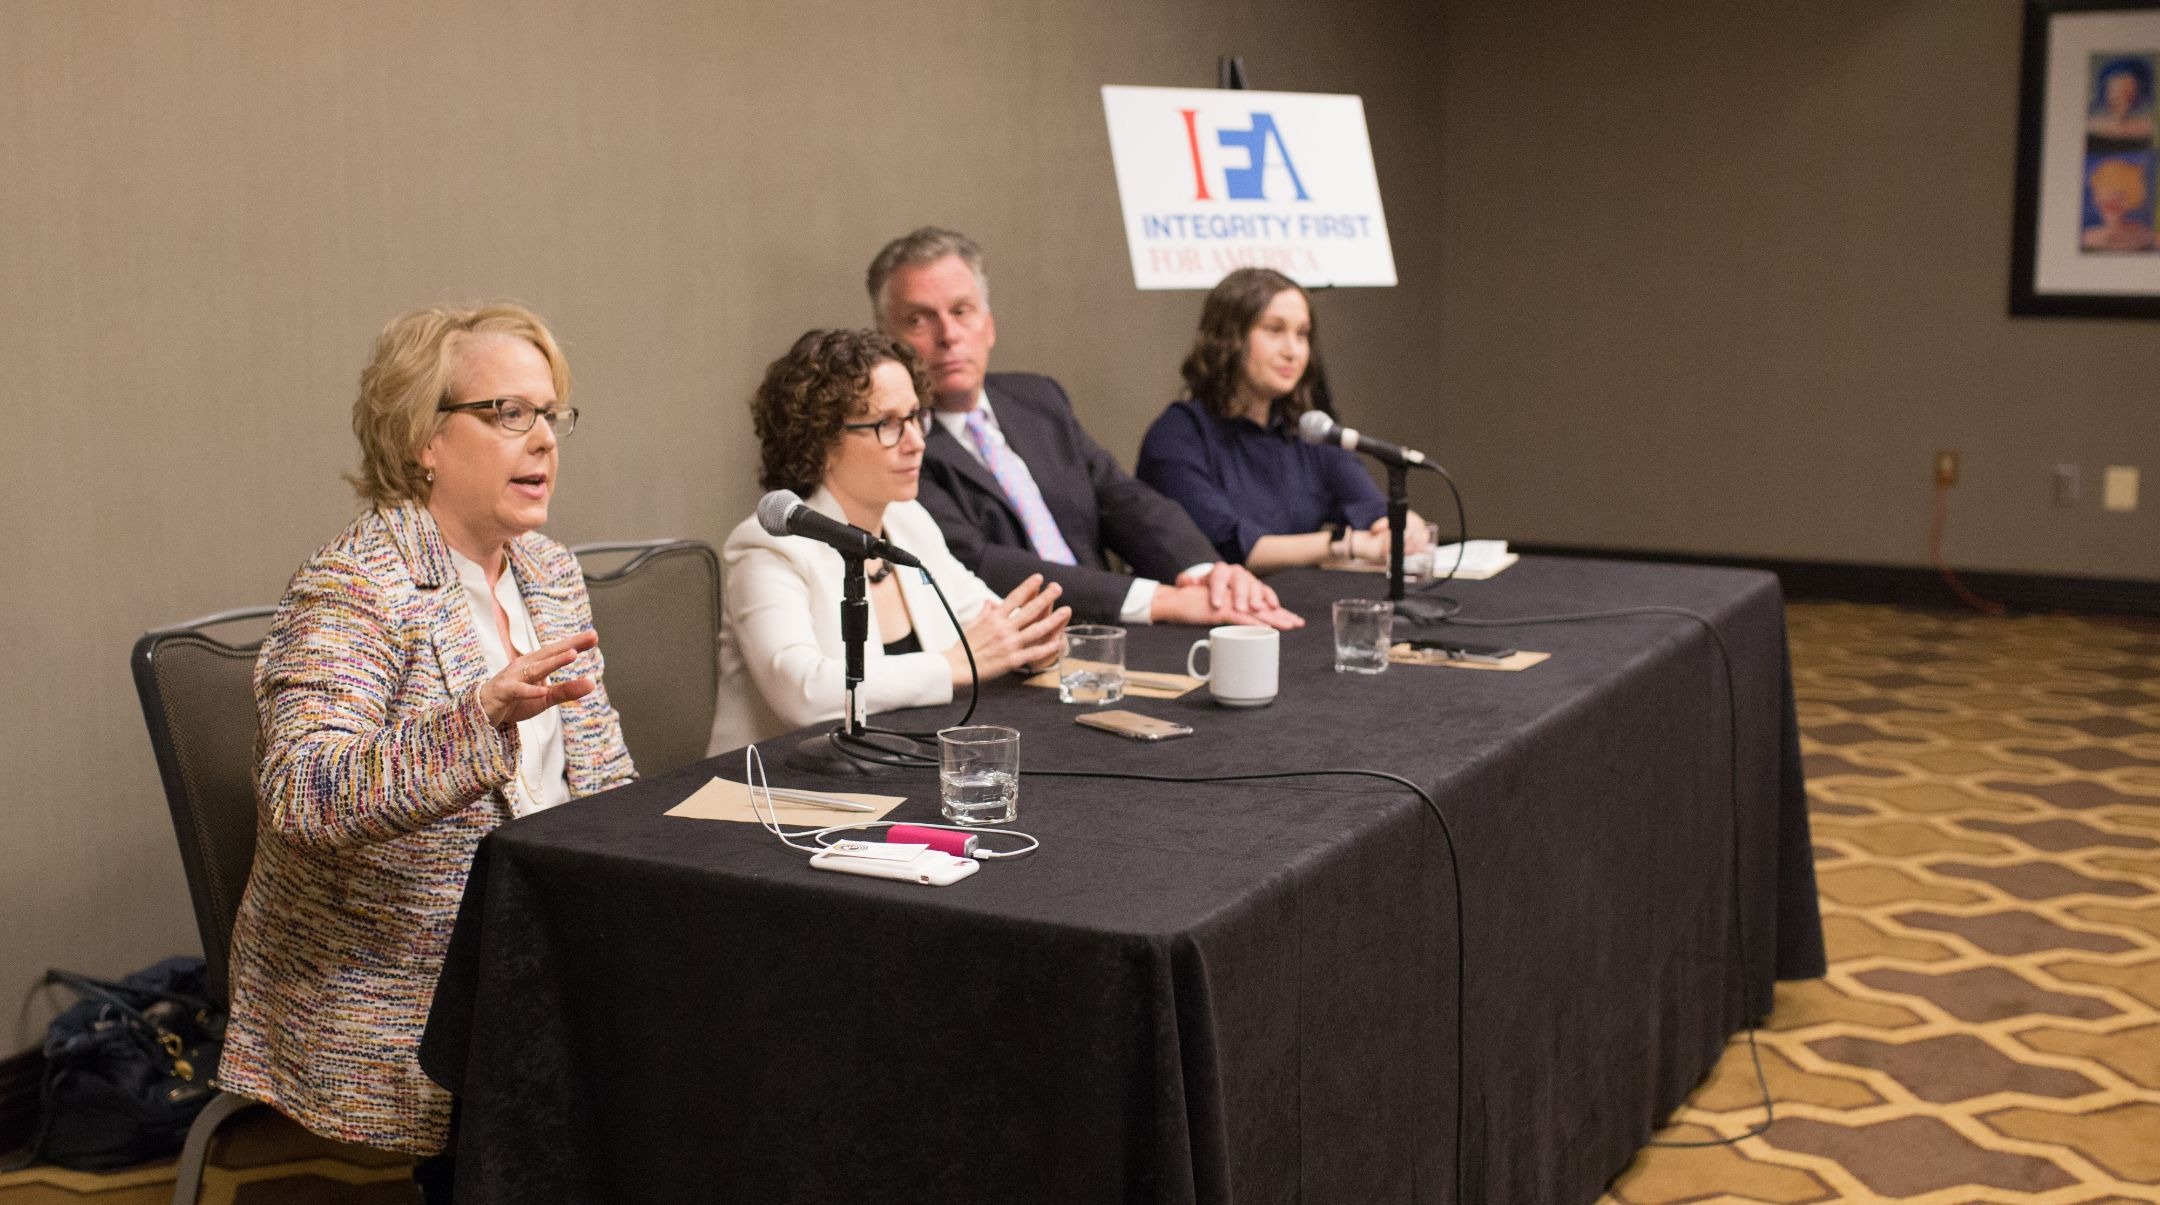 Roberta Kaplan addresses a panel in Washington D.C. about the case her organization, Integrity First for America, is bringing against the organizers of the neo-Nazi 2017 march in Charlottesville, Virginia. Seated left to right are Kaplan, her co-counsel, Karen Dunn, former Virginia Gov. Terry McAuliffe, and IFA executive director, Amy Spitalnick. (IFA/Emily Goodstein)